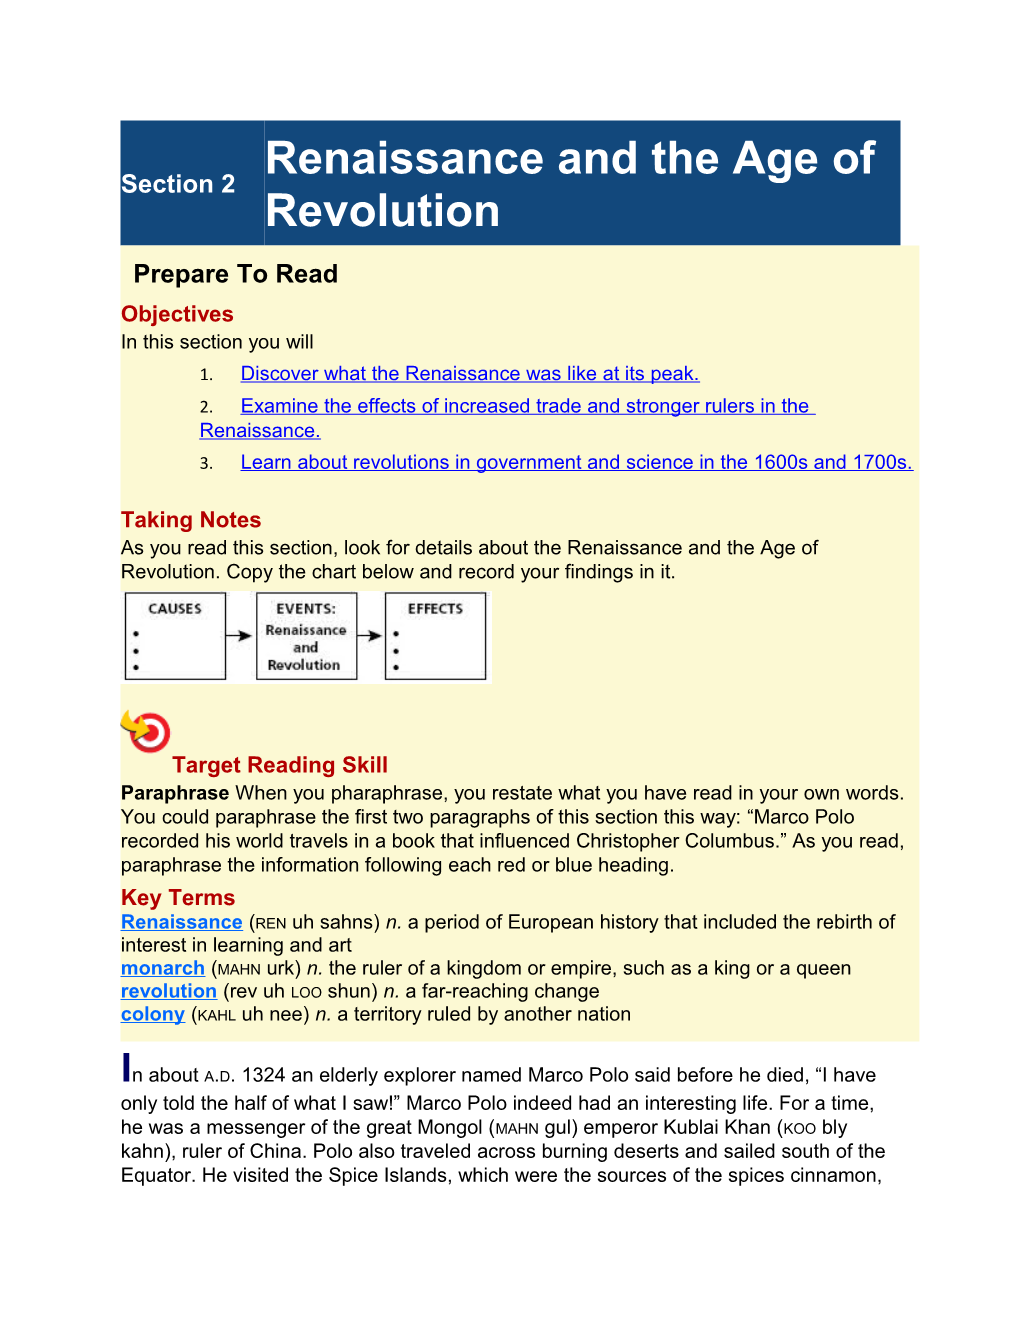 Renaissance and the Age of Revolution